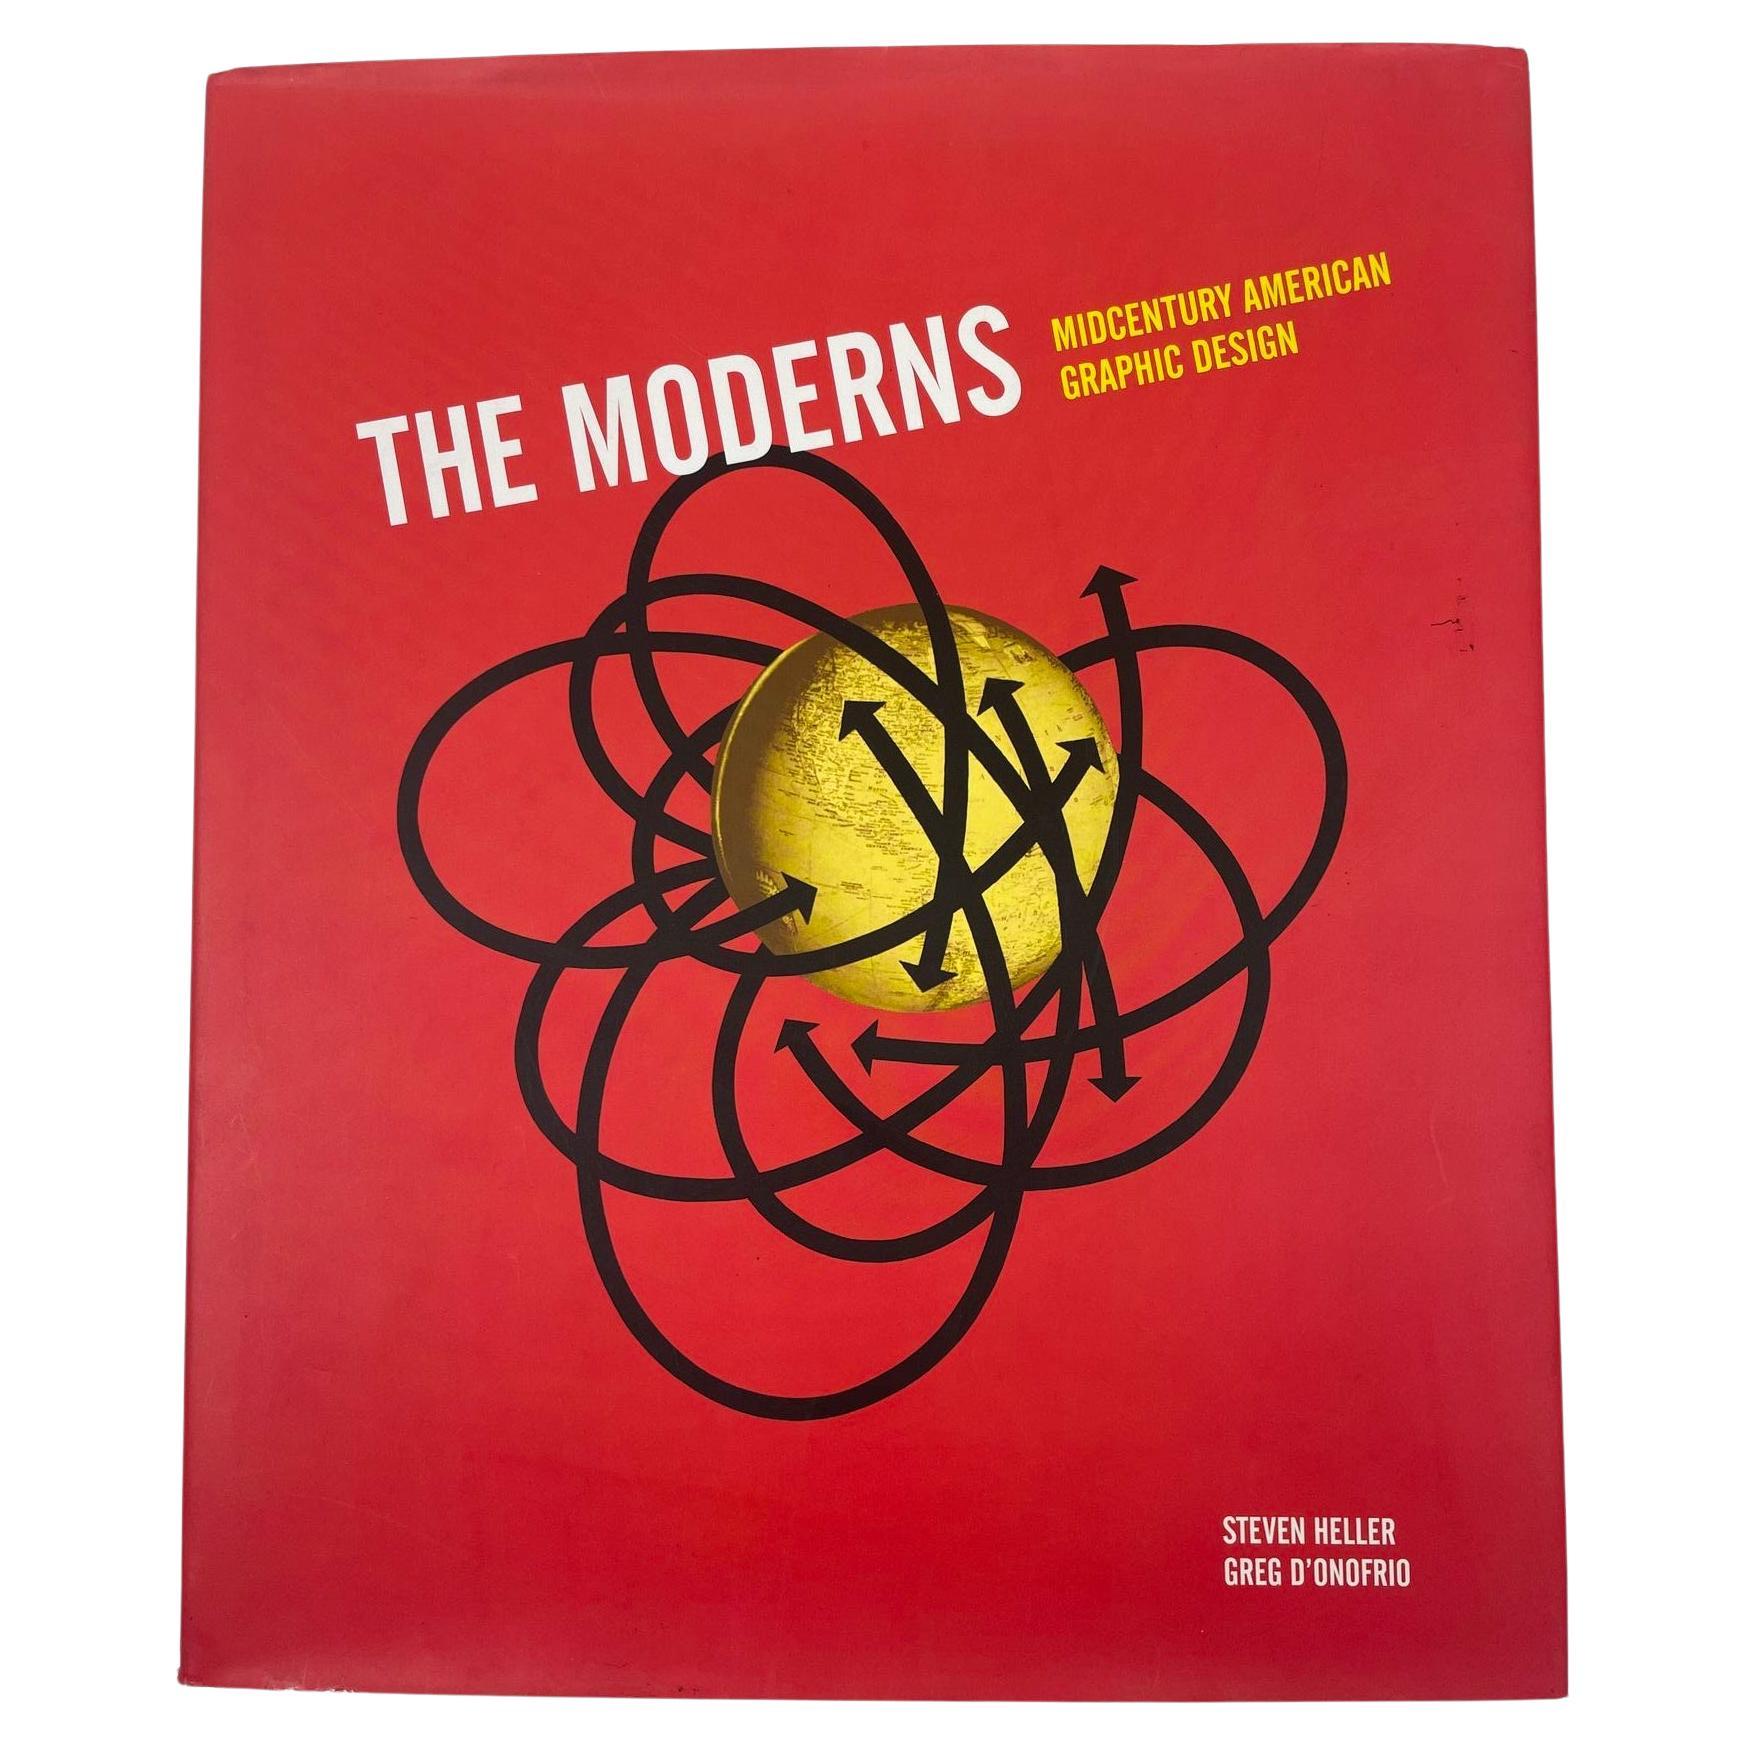 The Moderns: Mid-century American Graphic Design Hardcover 2017 For Sale